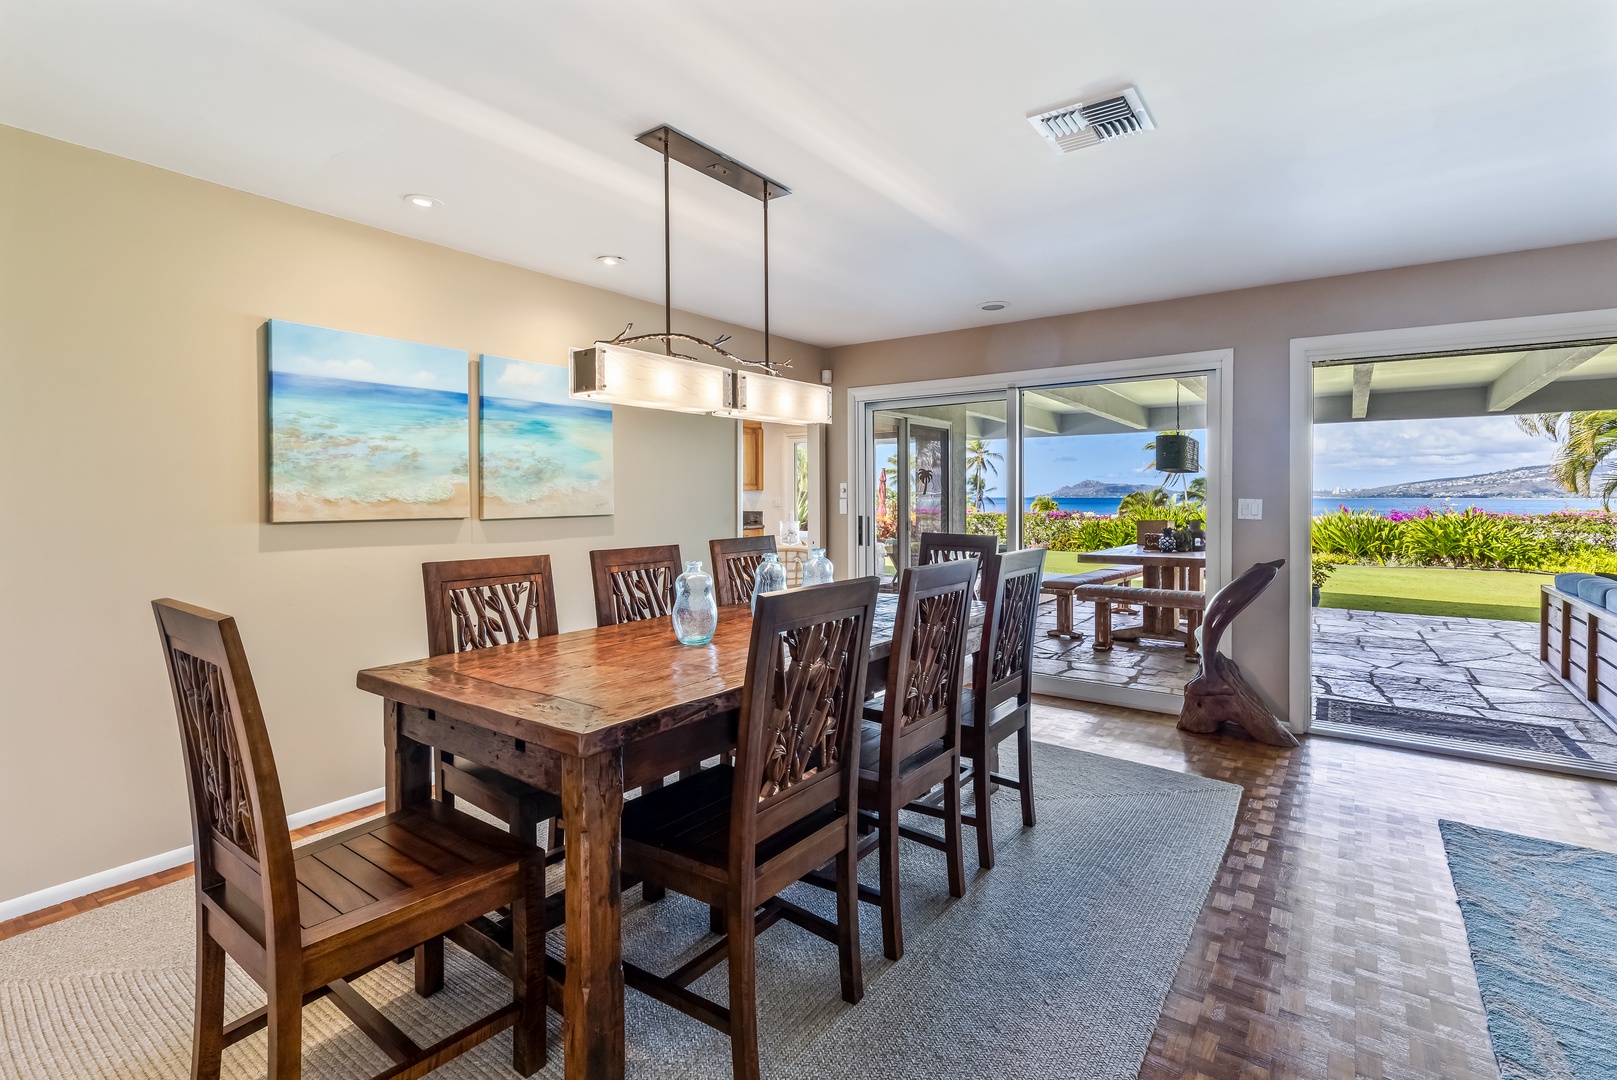 Honolulu Vacation Rentals, Hale Ola - The large dining table seats up to 8 guests